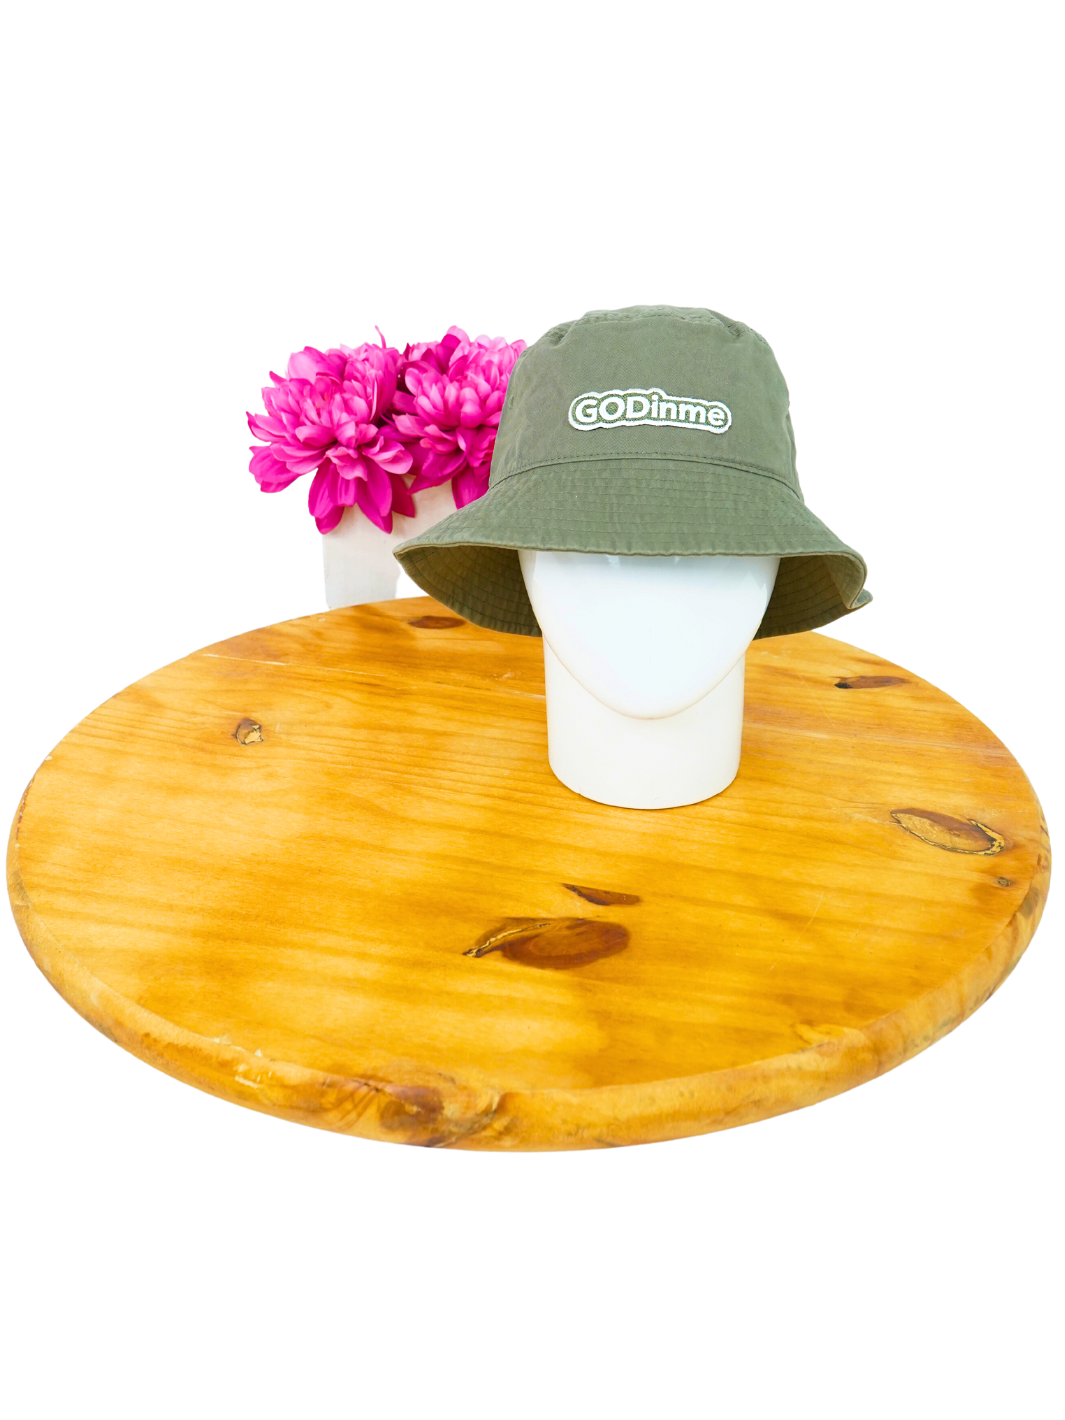 Represent your timeless style with this Olive Green GODinme Bucket Hat featuring GODinme brand name and logo embroidered in White.